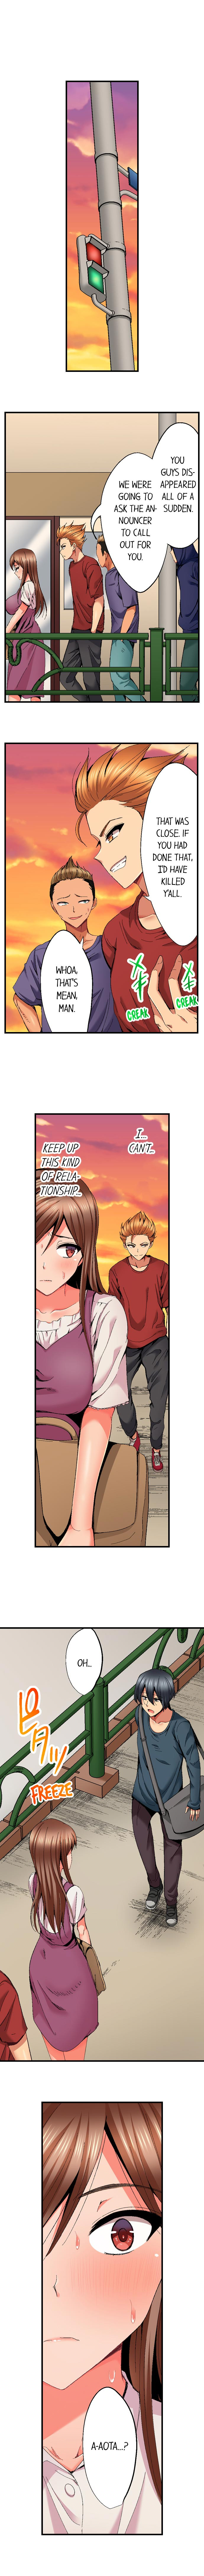 Netorare My Teacher With My Friends - Chapter 15 Page 8